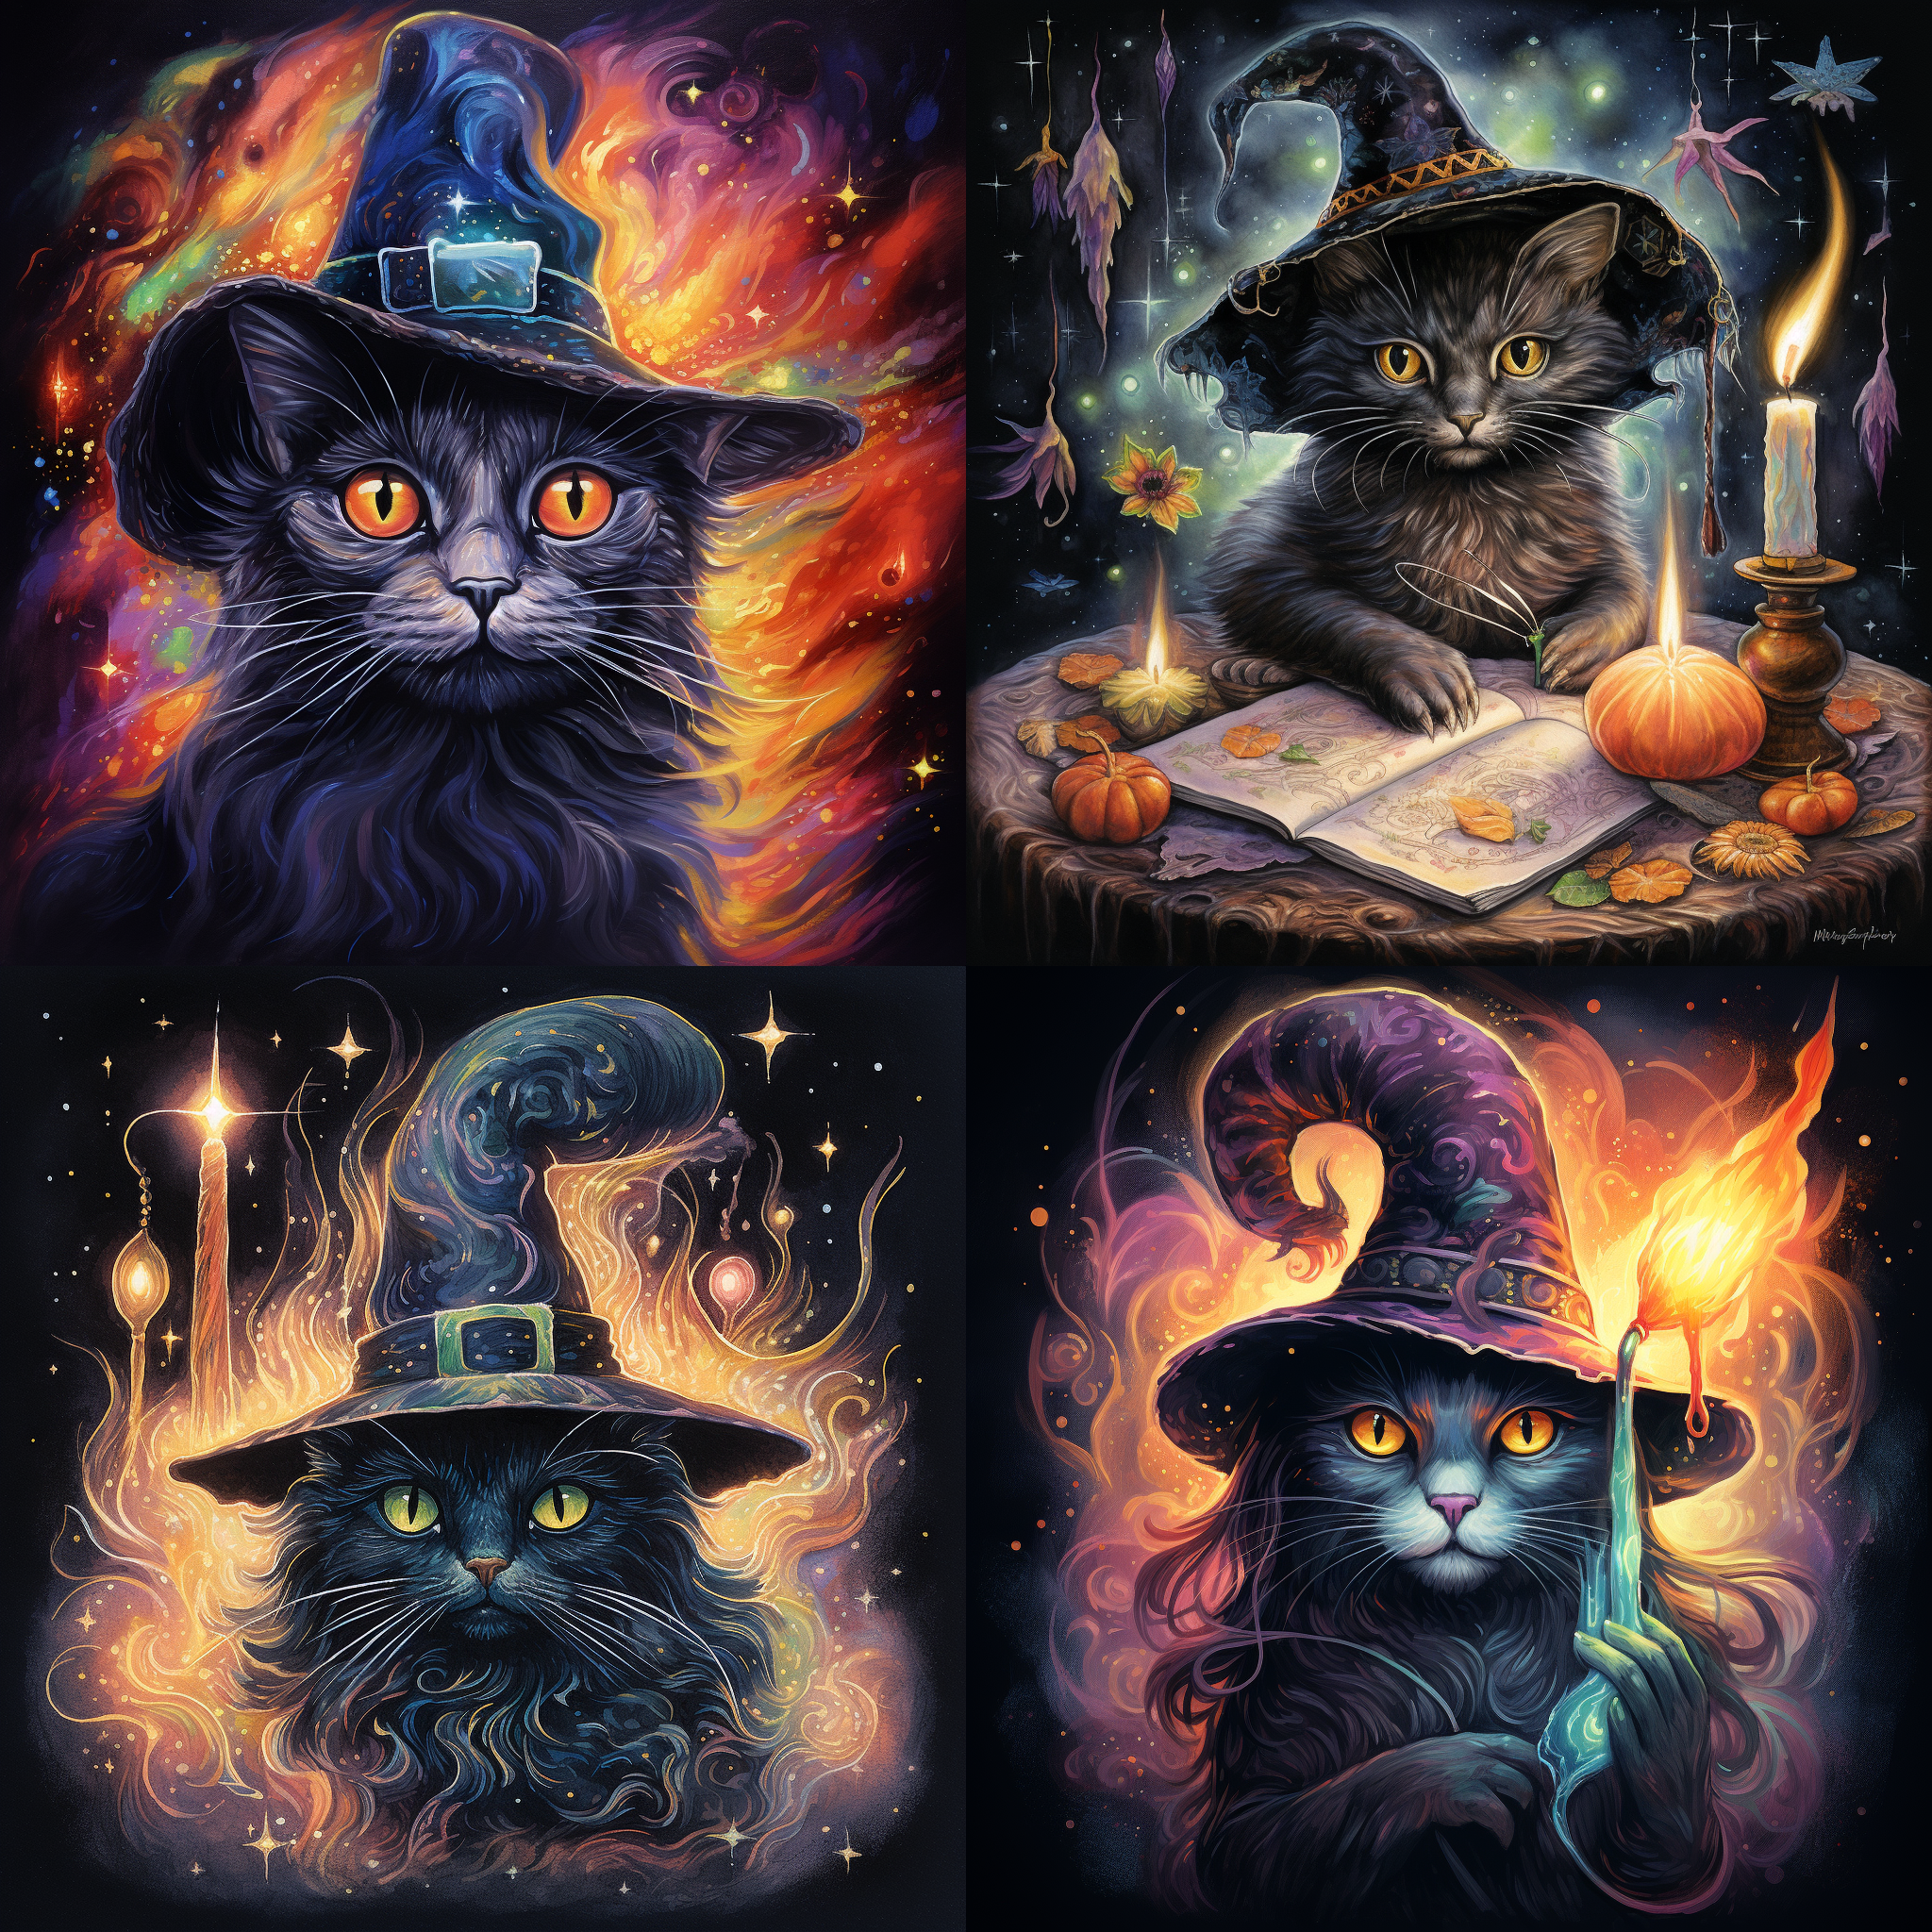 A magical cat wearing a witch's hat, casting a spell